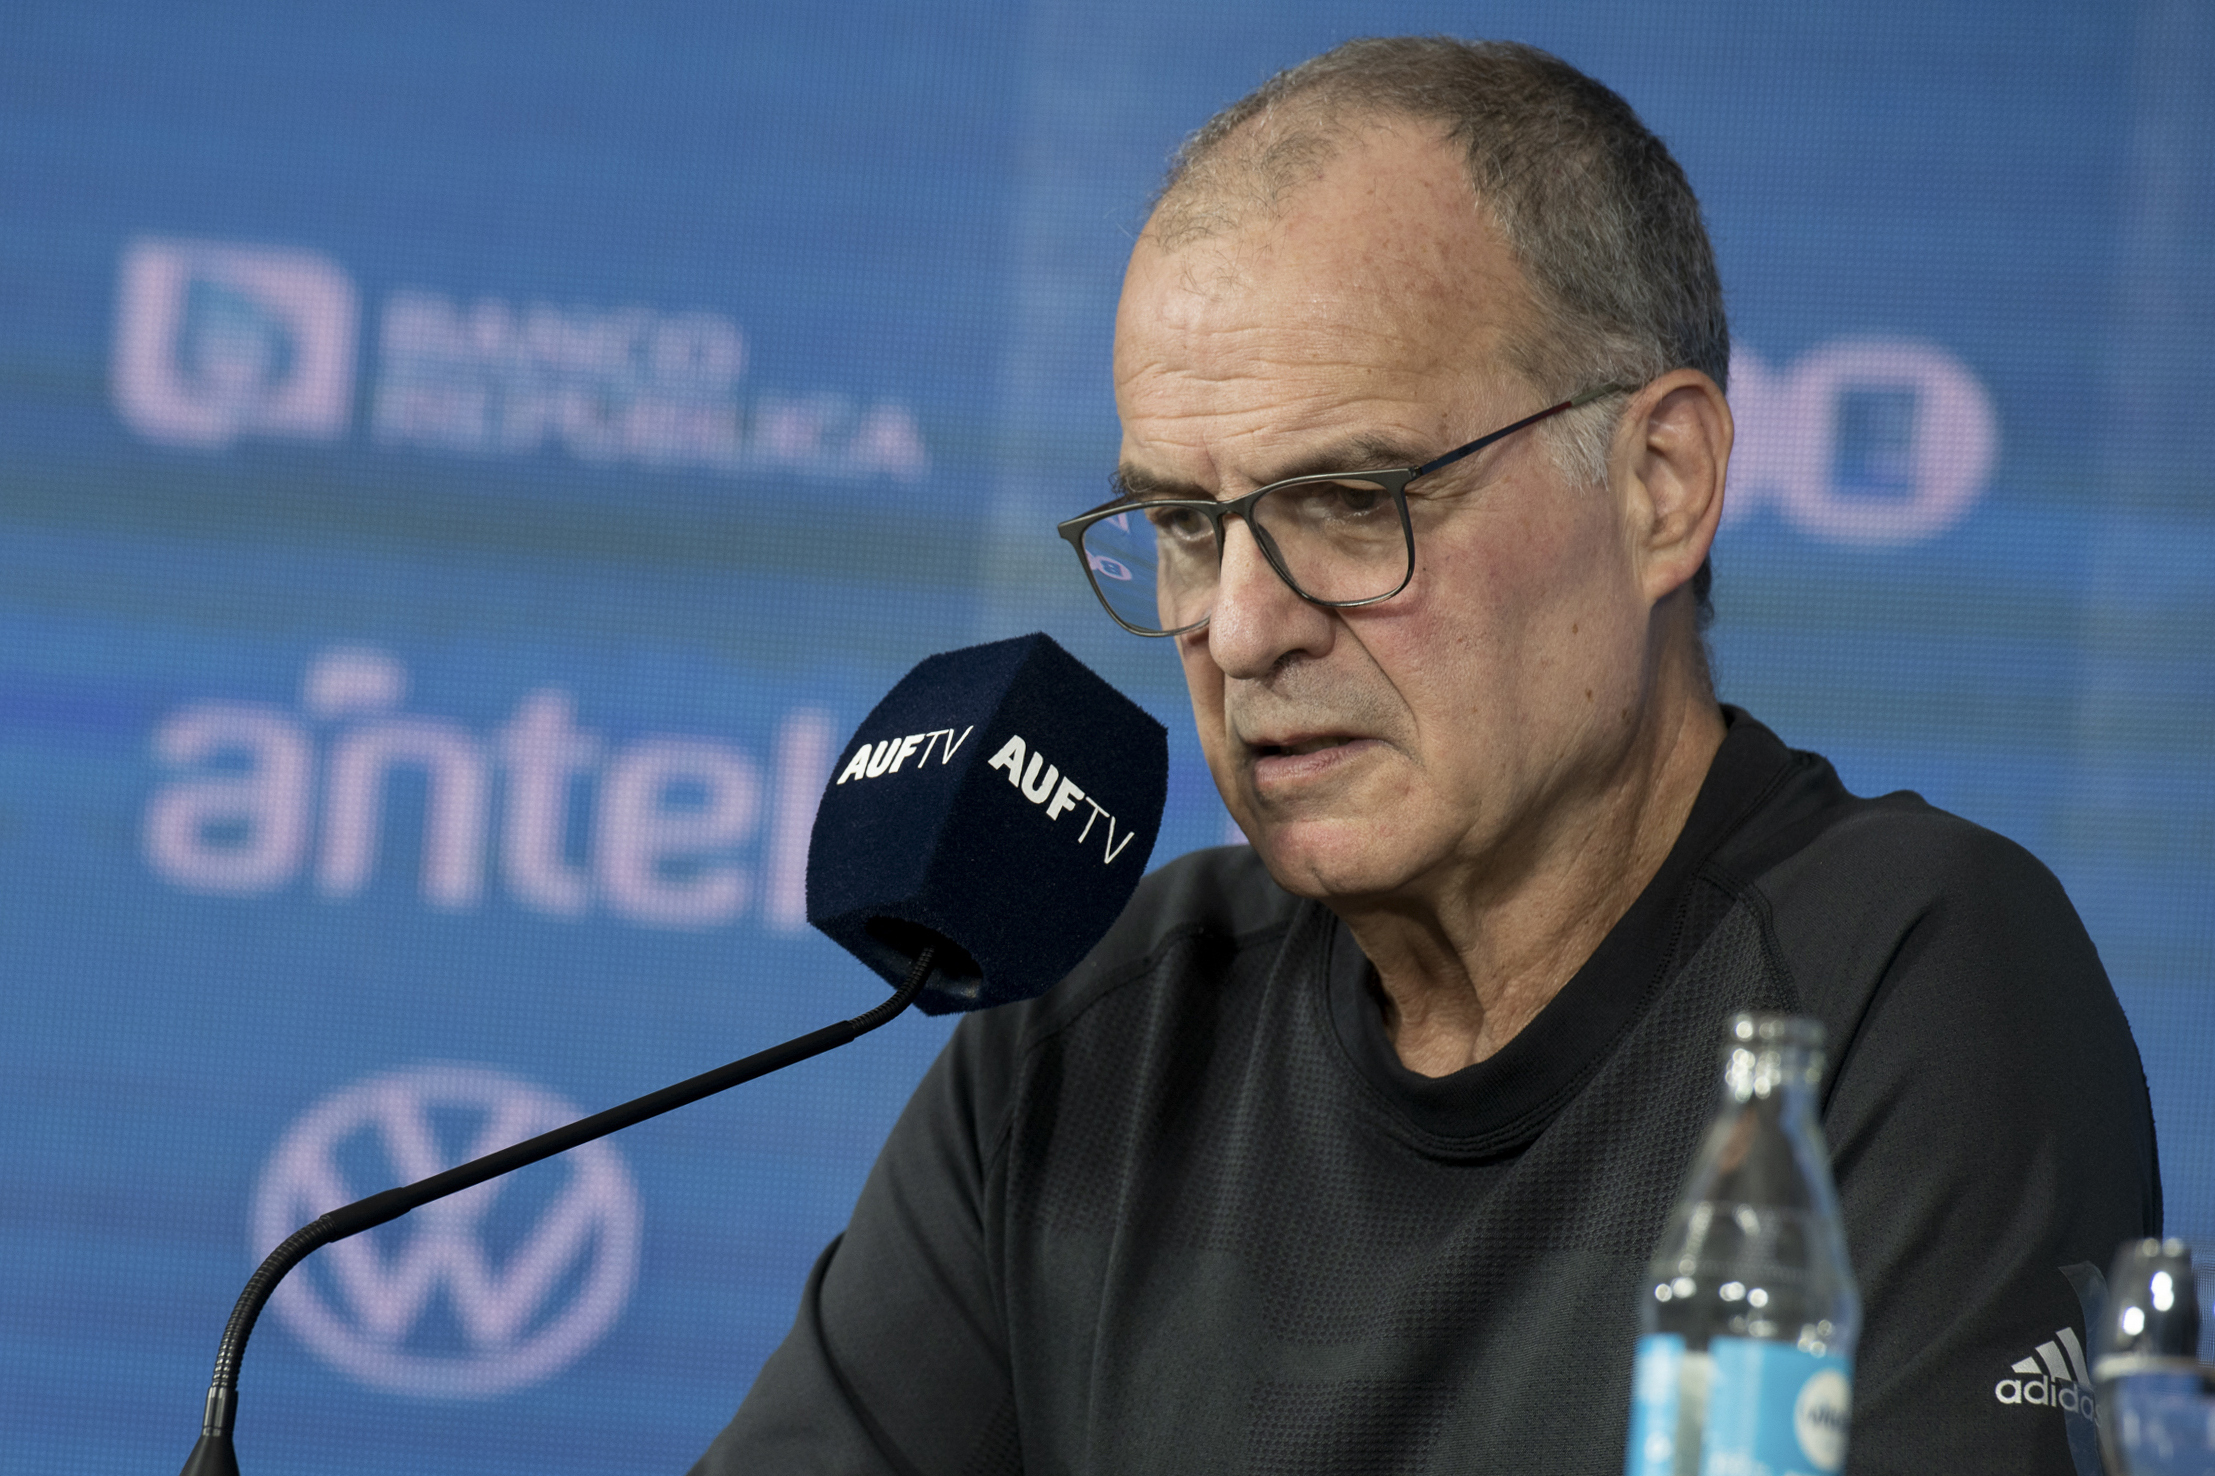 bielsa-surprises-again:-amateur-player-is-called-up-to-the-uruguay-national-team-for-a-friendly-prior-to-the-copa-america